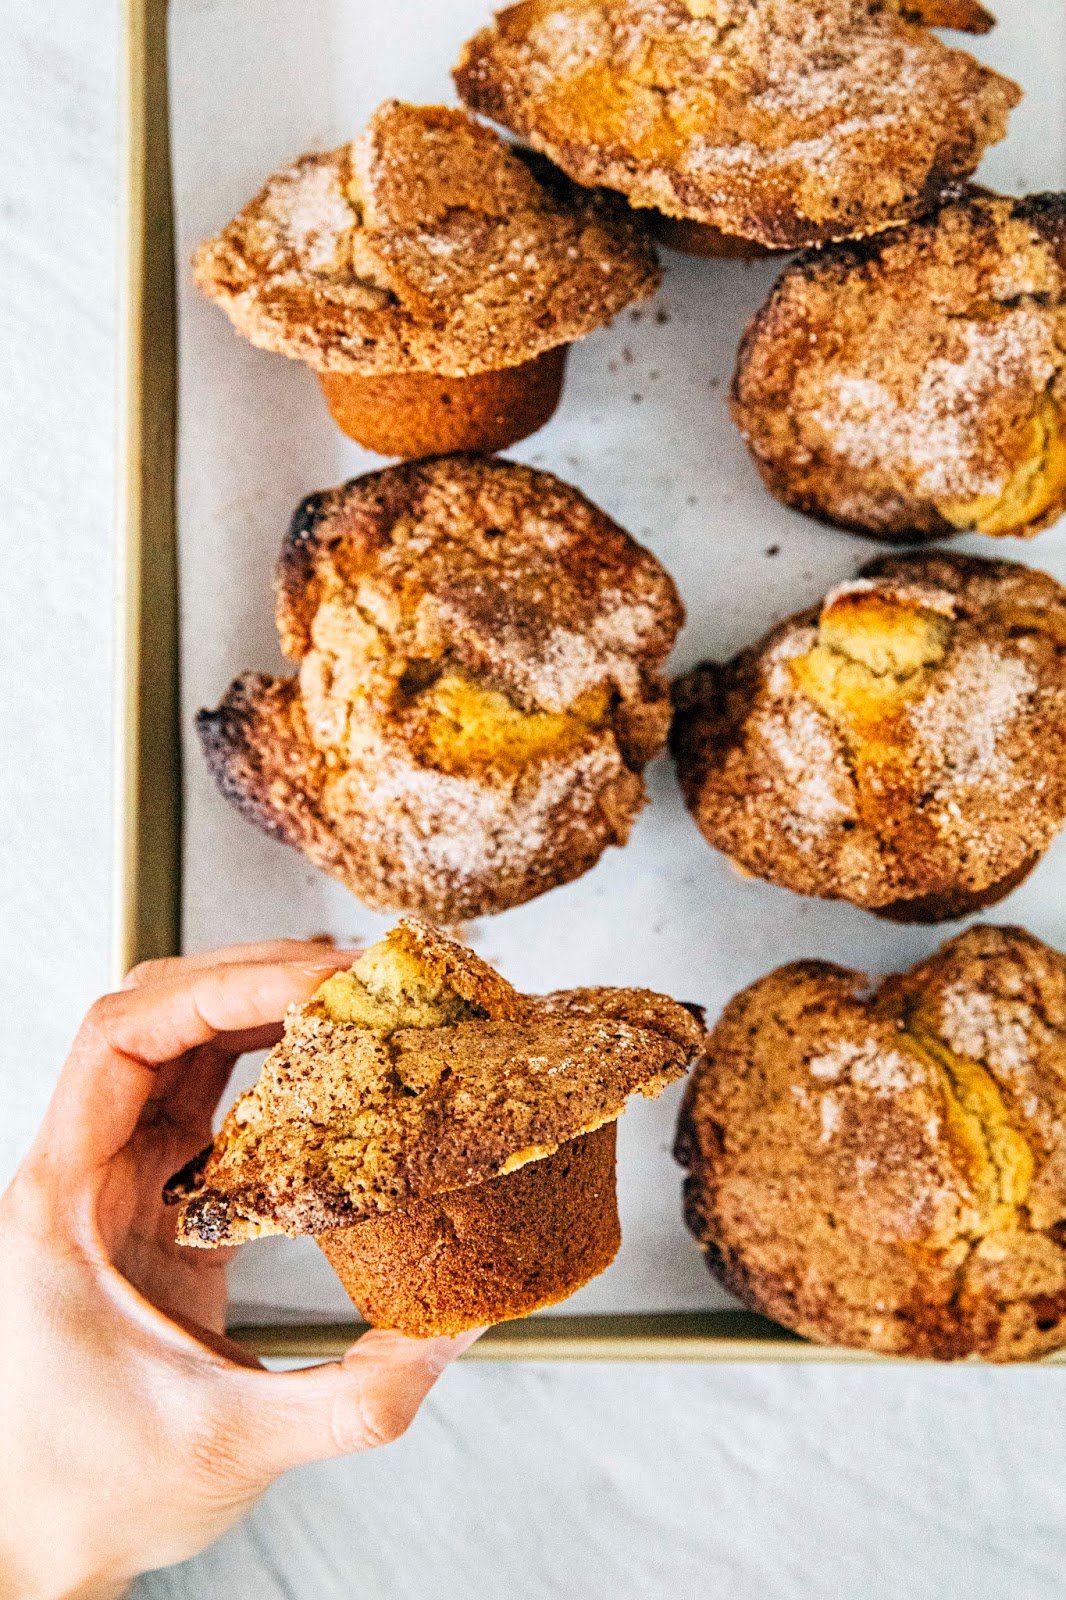 photo of hand holding a banana cinnamon muffin showing off its domed top